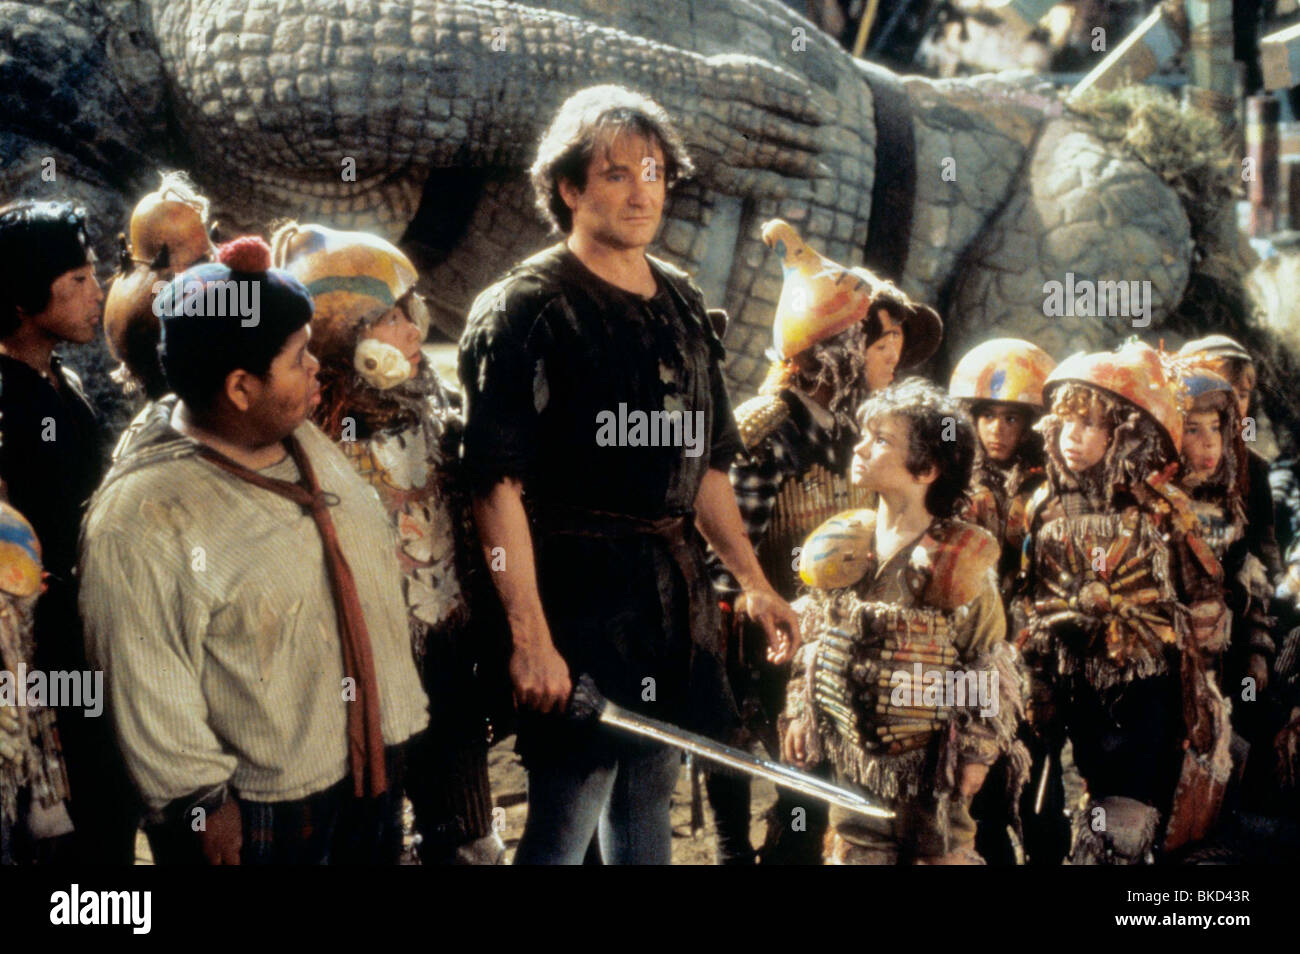 HOOK (1991) ROBIN WILLIAMS, THE LOST BOYS (CHARACTERS) HOK 047